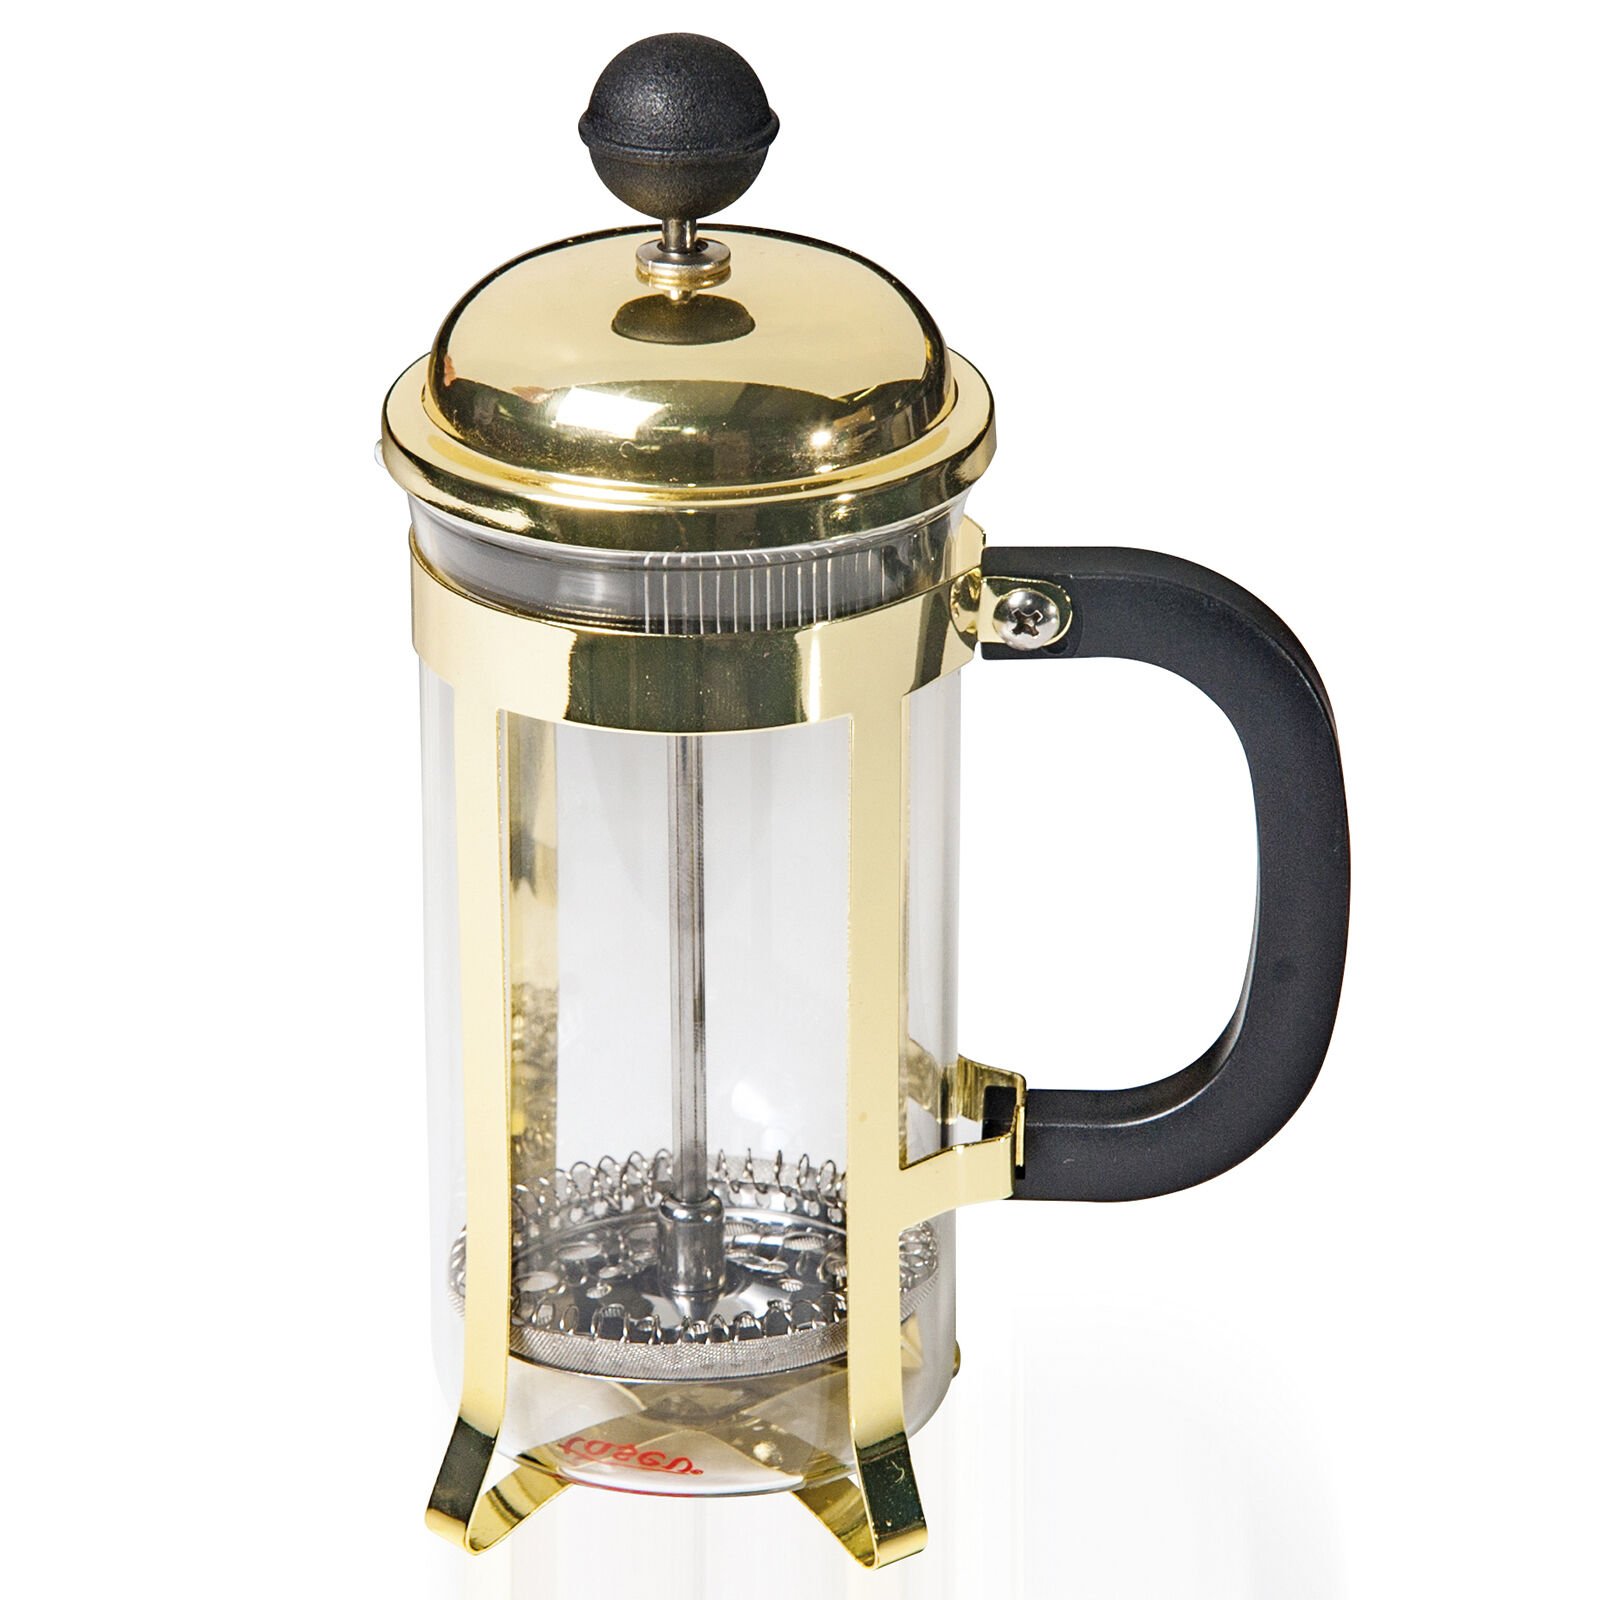 GRV-D5 Groovy Lux French Press Gold - 350 cc